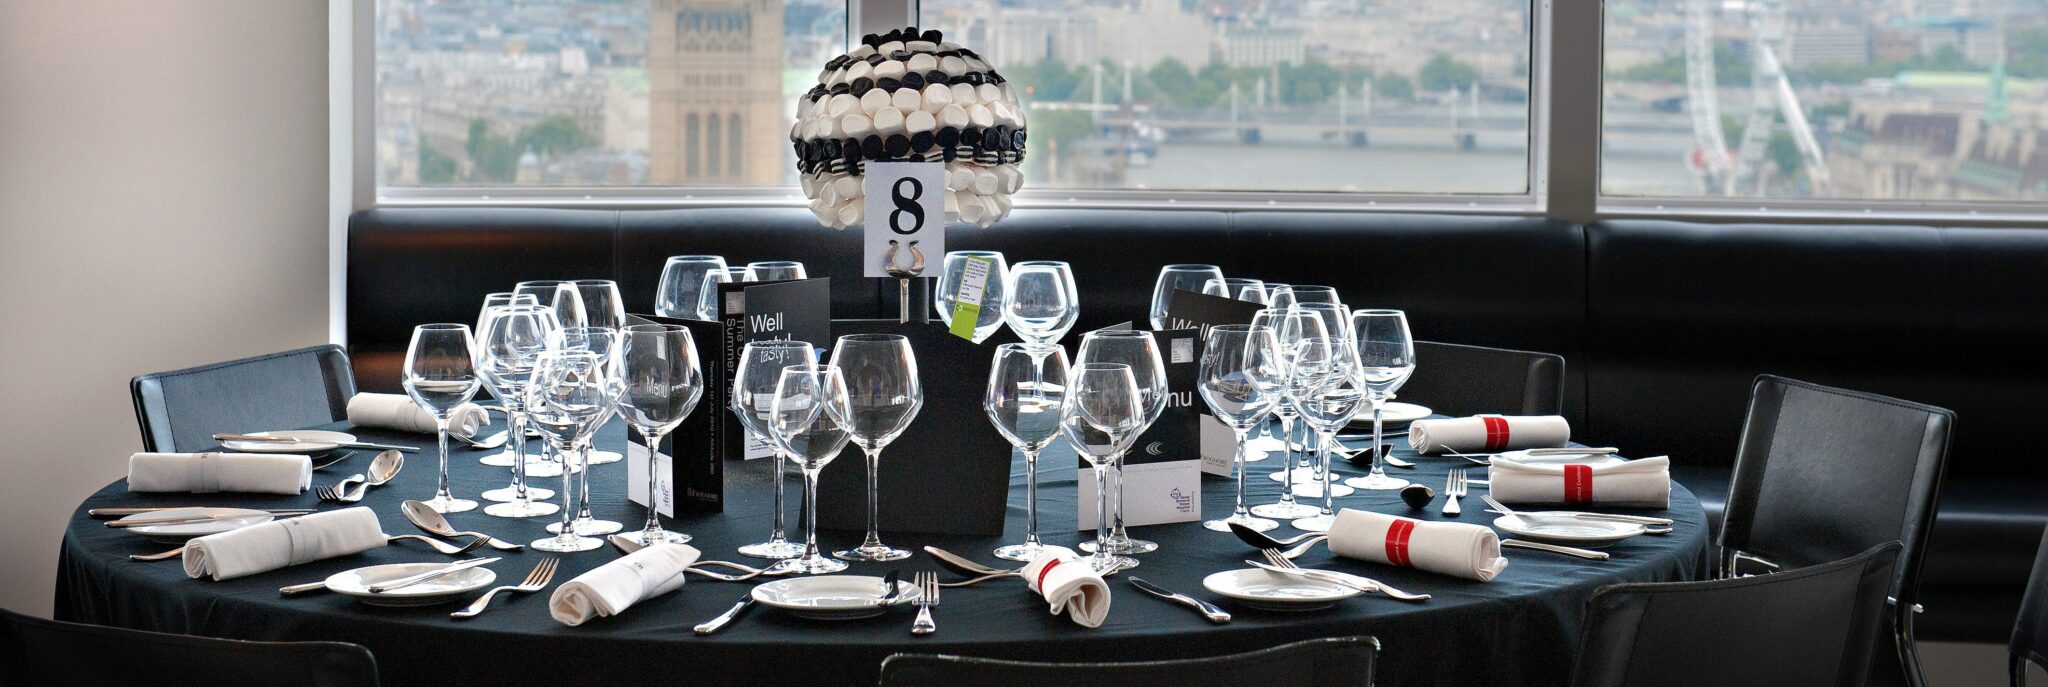 GOSH Charity Dinner Event | Table Decoration